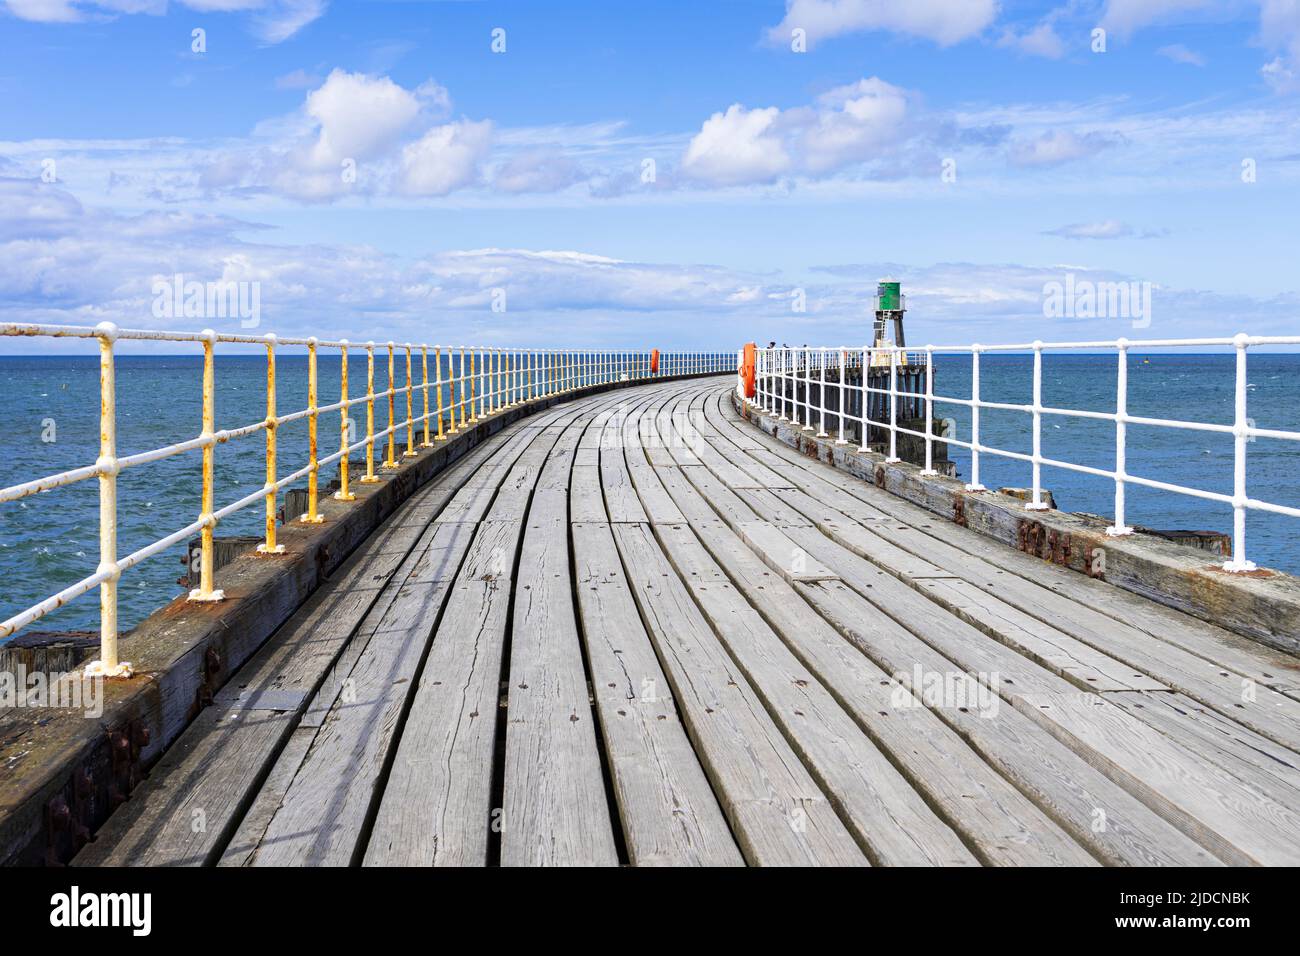 Whitby Yorkshire Whitby Pier Wooden Boardwalk of the pier at Whitby North Yorkshire England UK GB Europe Stock Photo